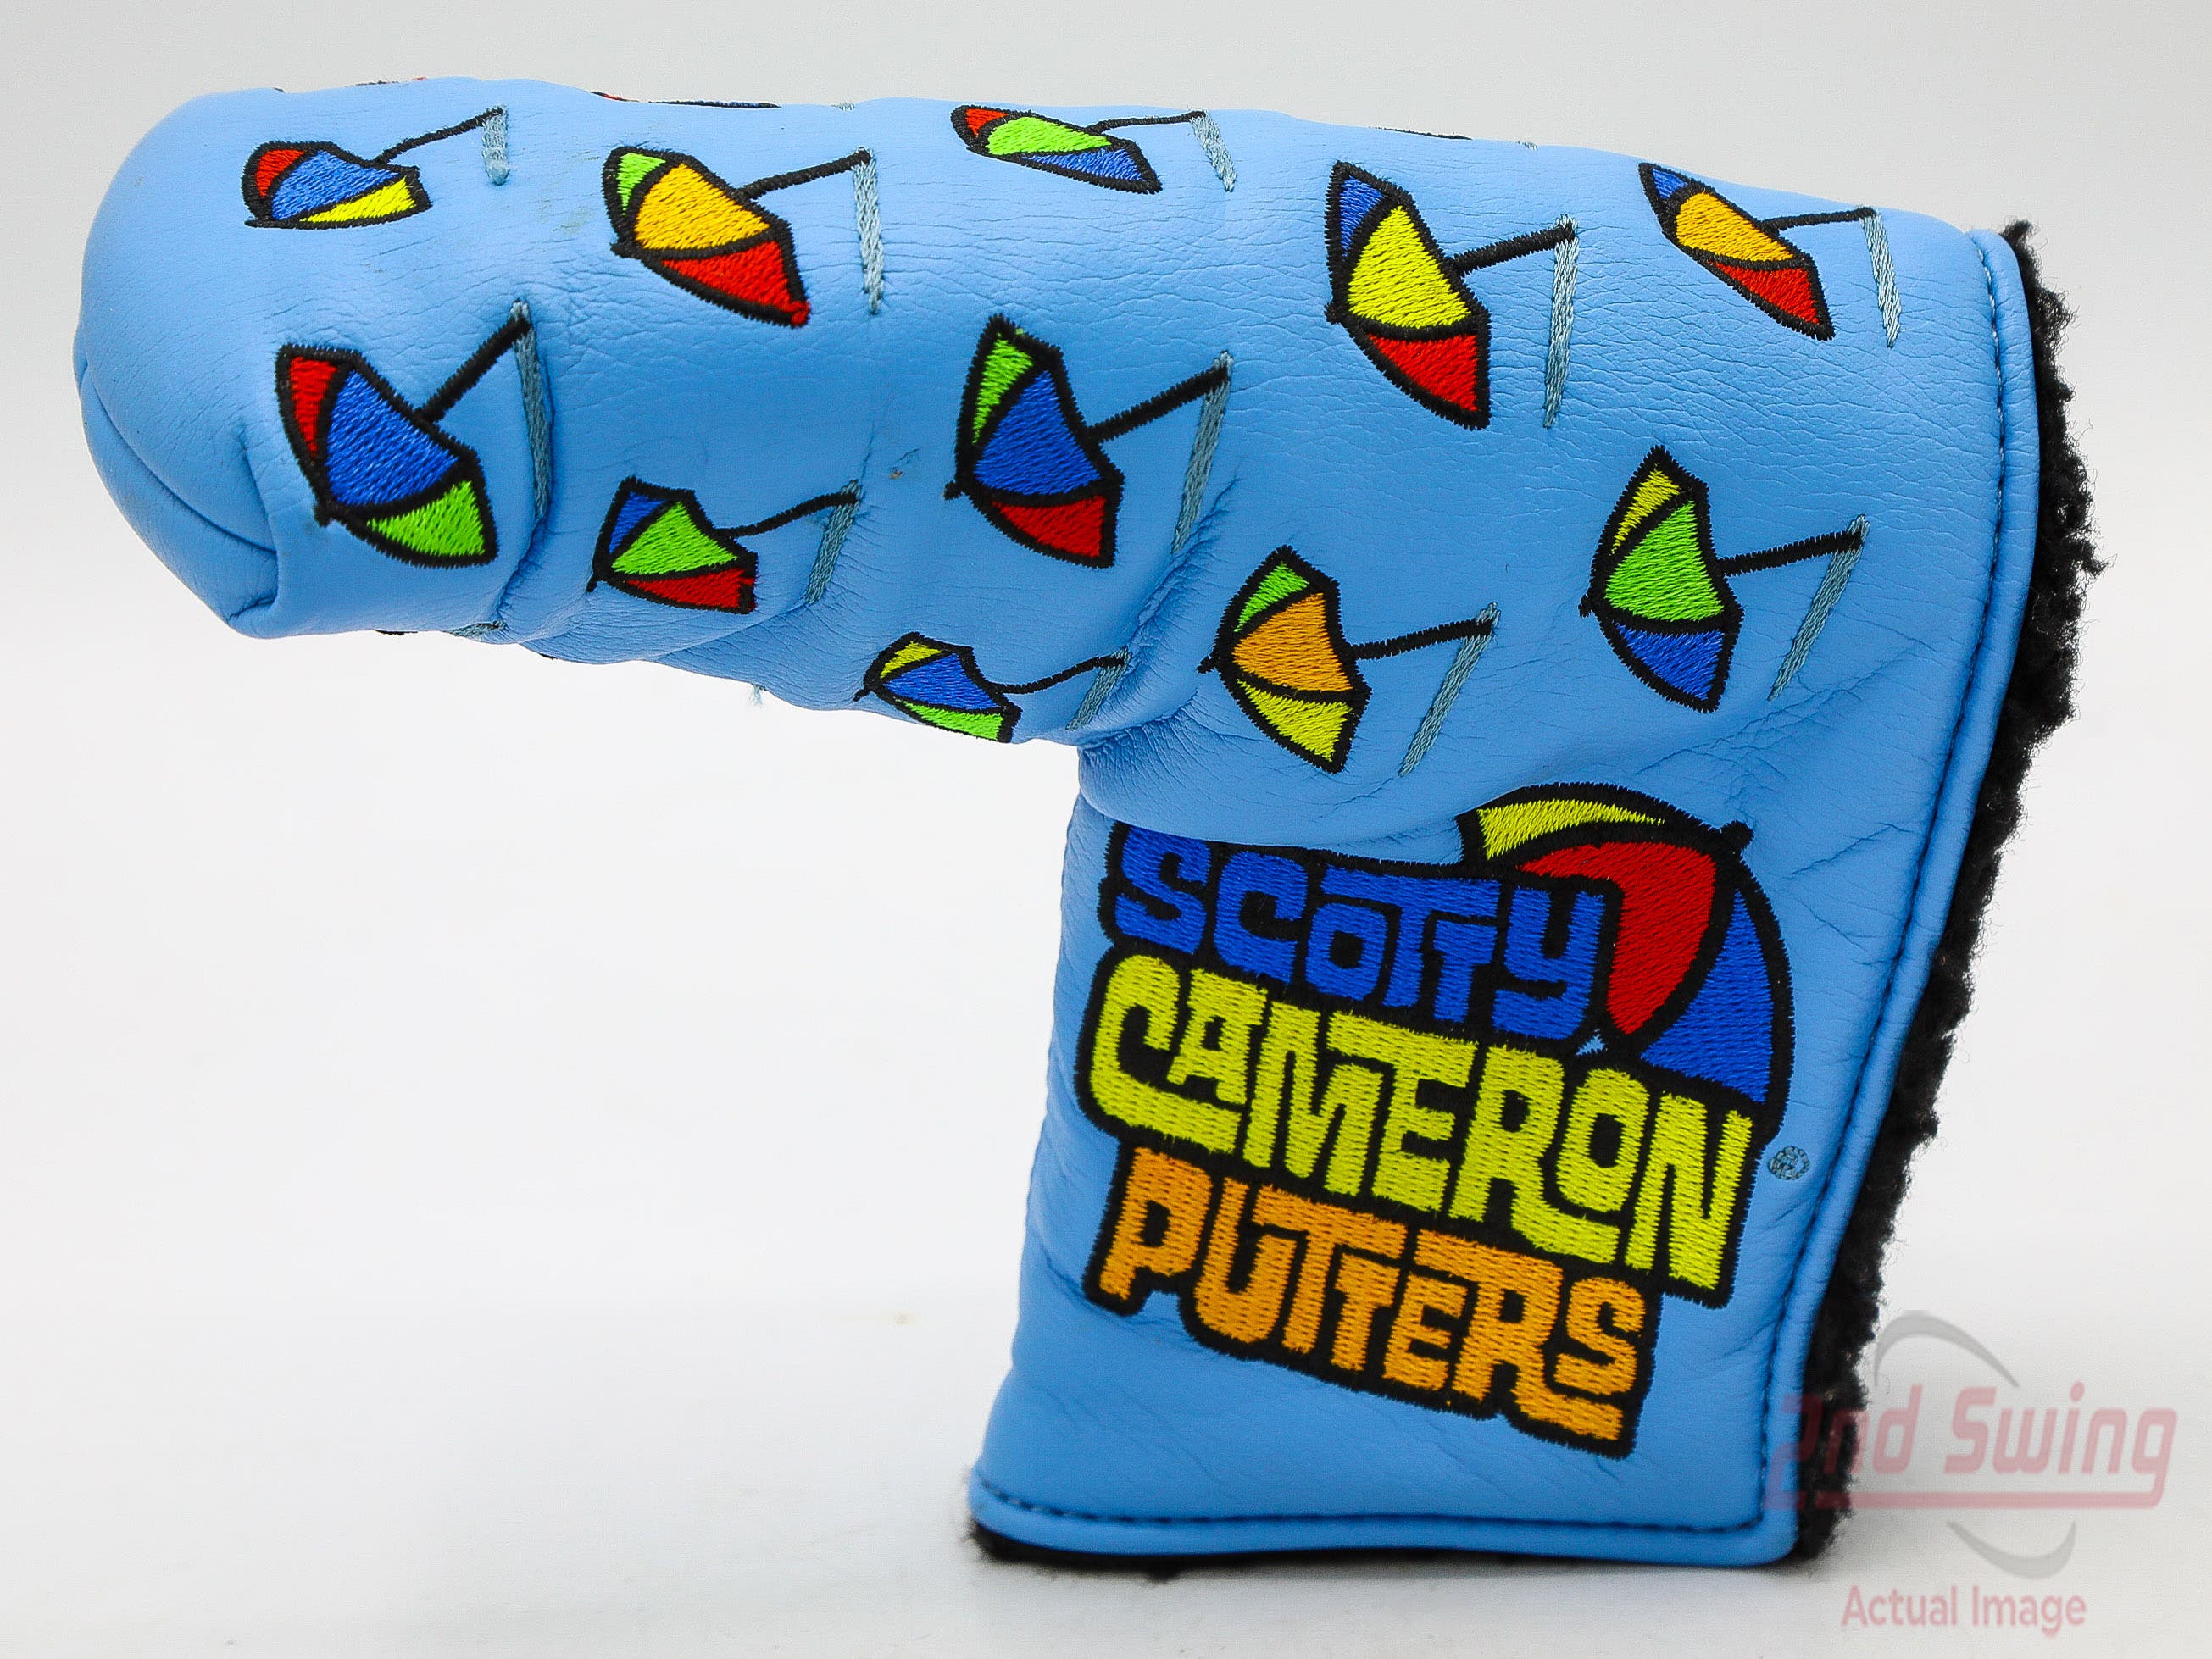 Titleist Scotty Cameron Limited Edition Putter Headcover (D